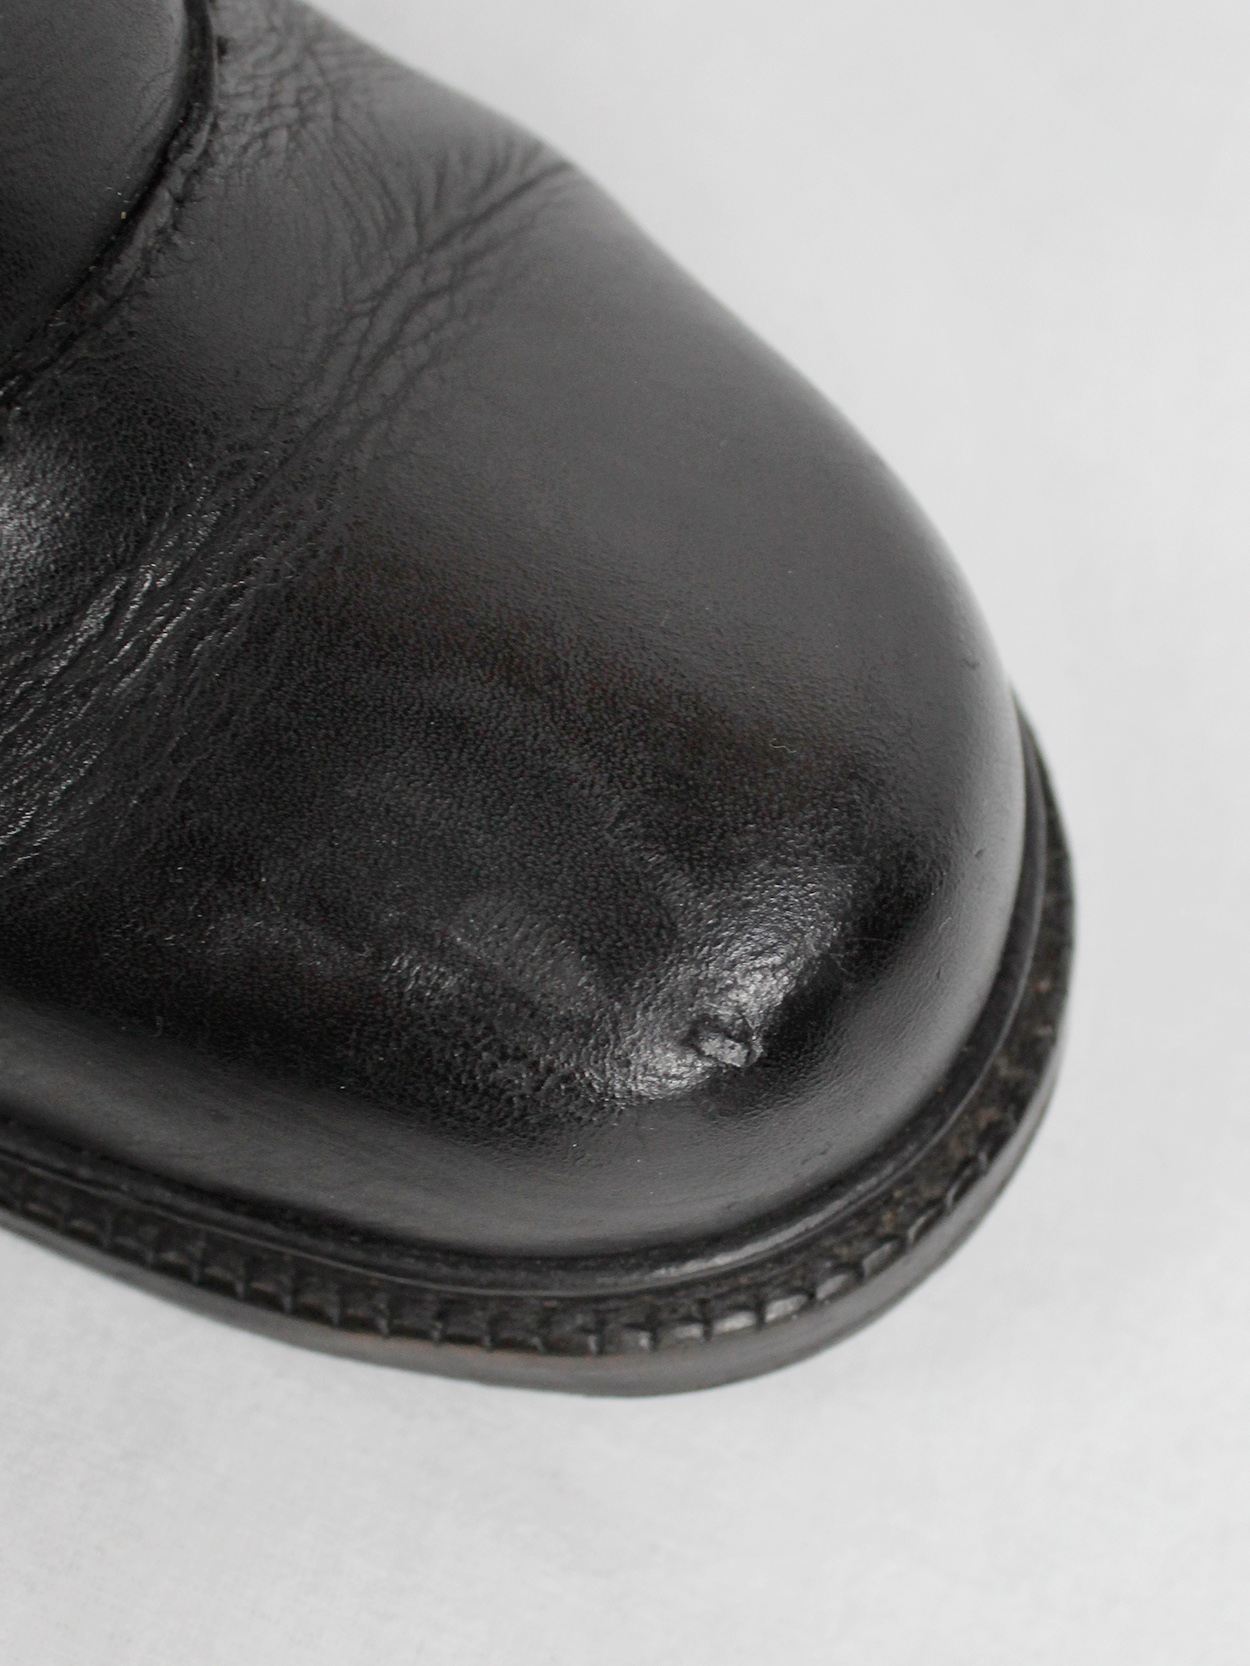 Dirk Bikkembergs black boots with flap and laces through the soles (37 ...